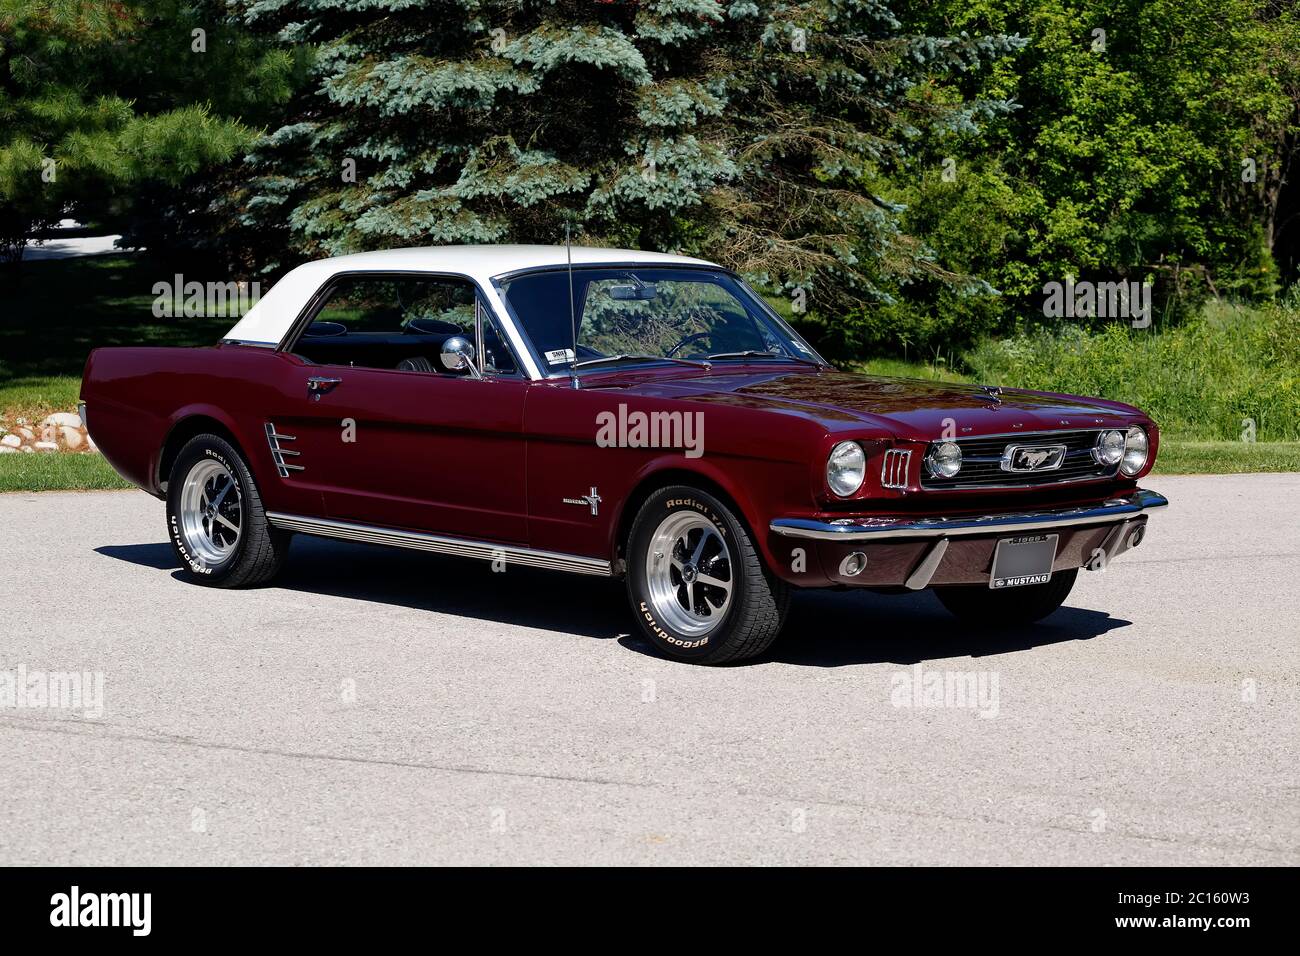 1966 Ford Mustang on pavement Stock Photo - Alamy